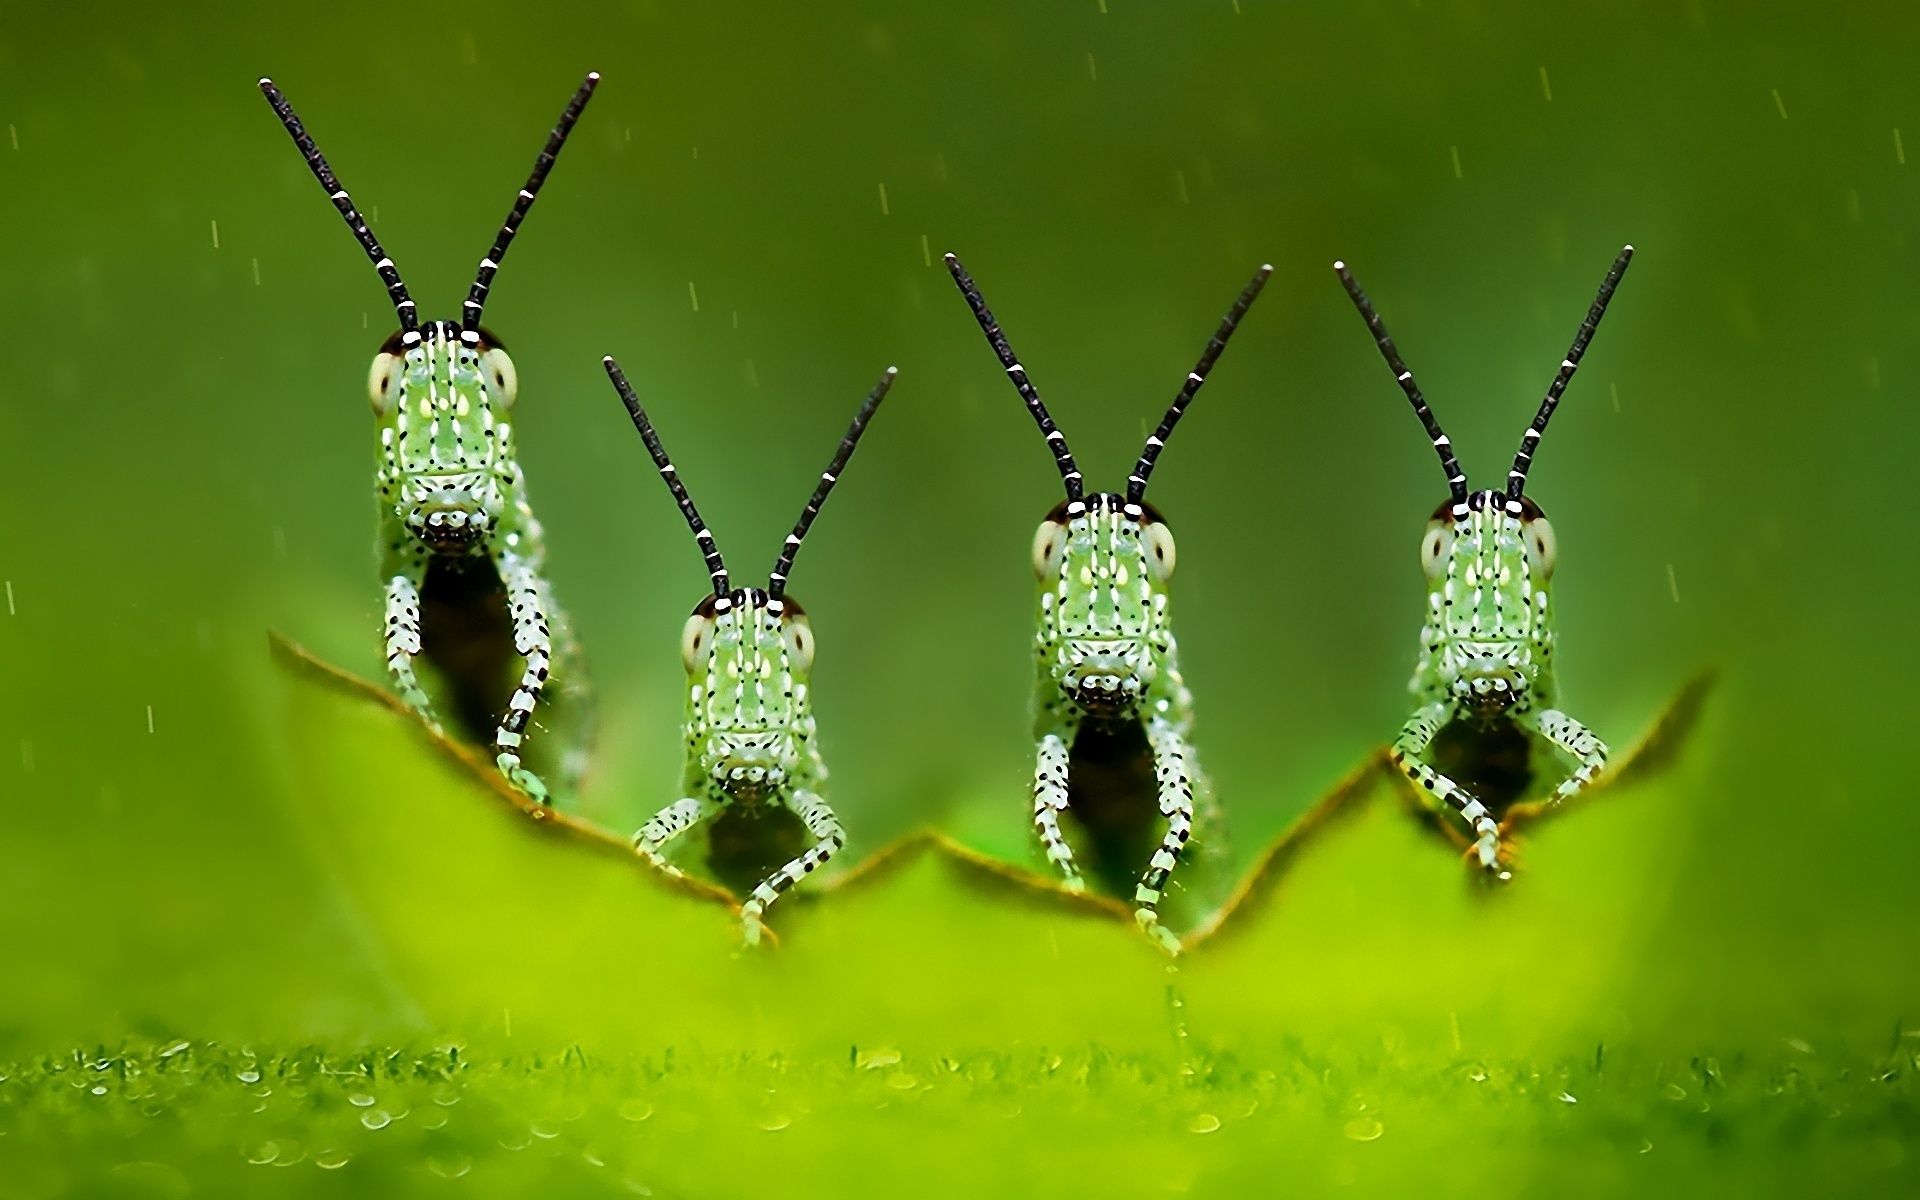 Insects Desktop Background. Insects Desktop Background, Insects Wallpaper and Winged Insects Wallpaper